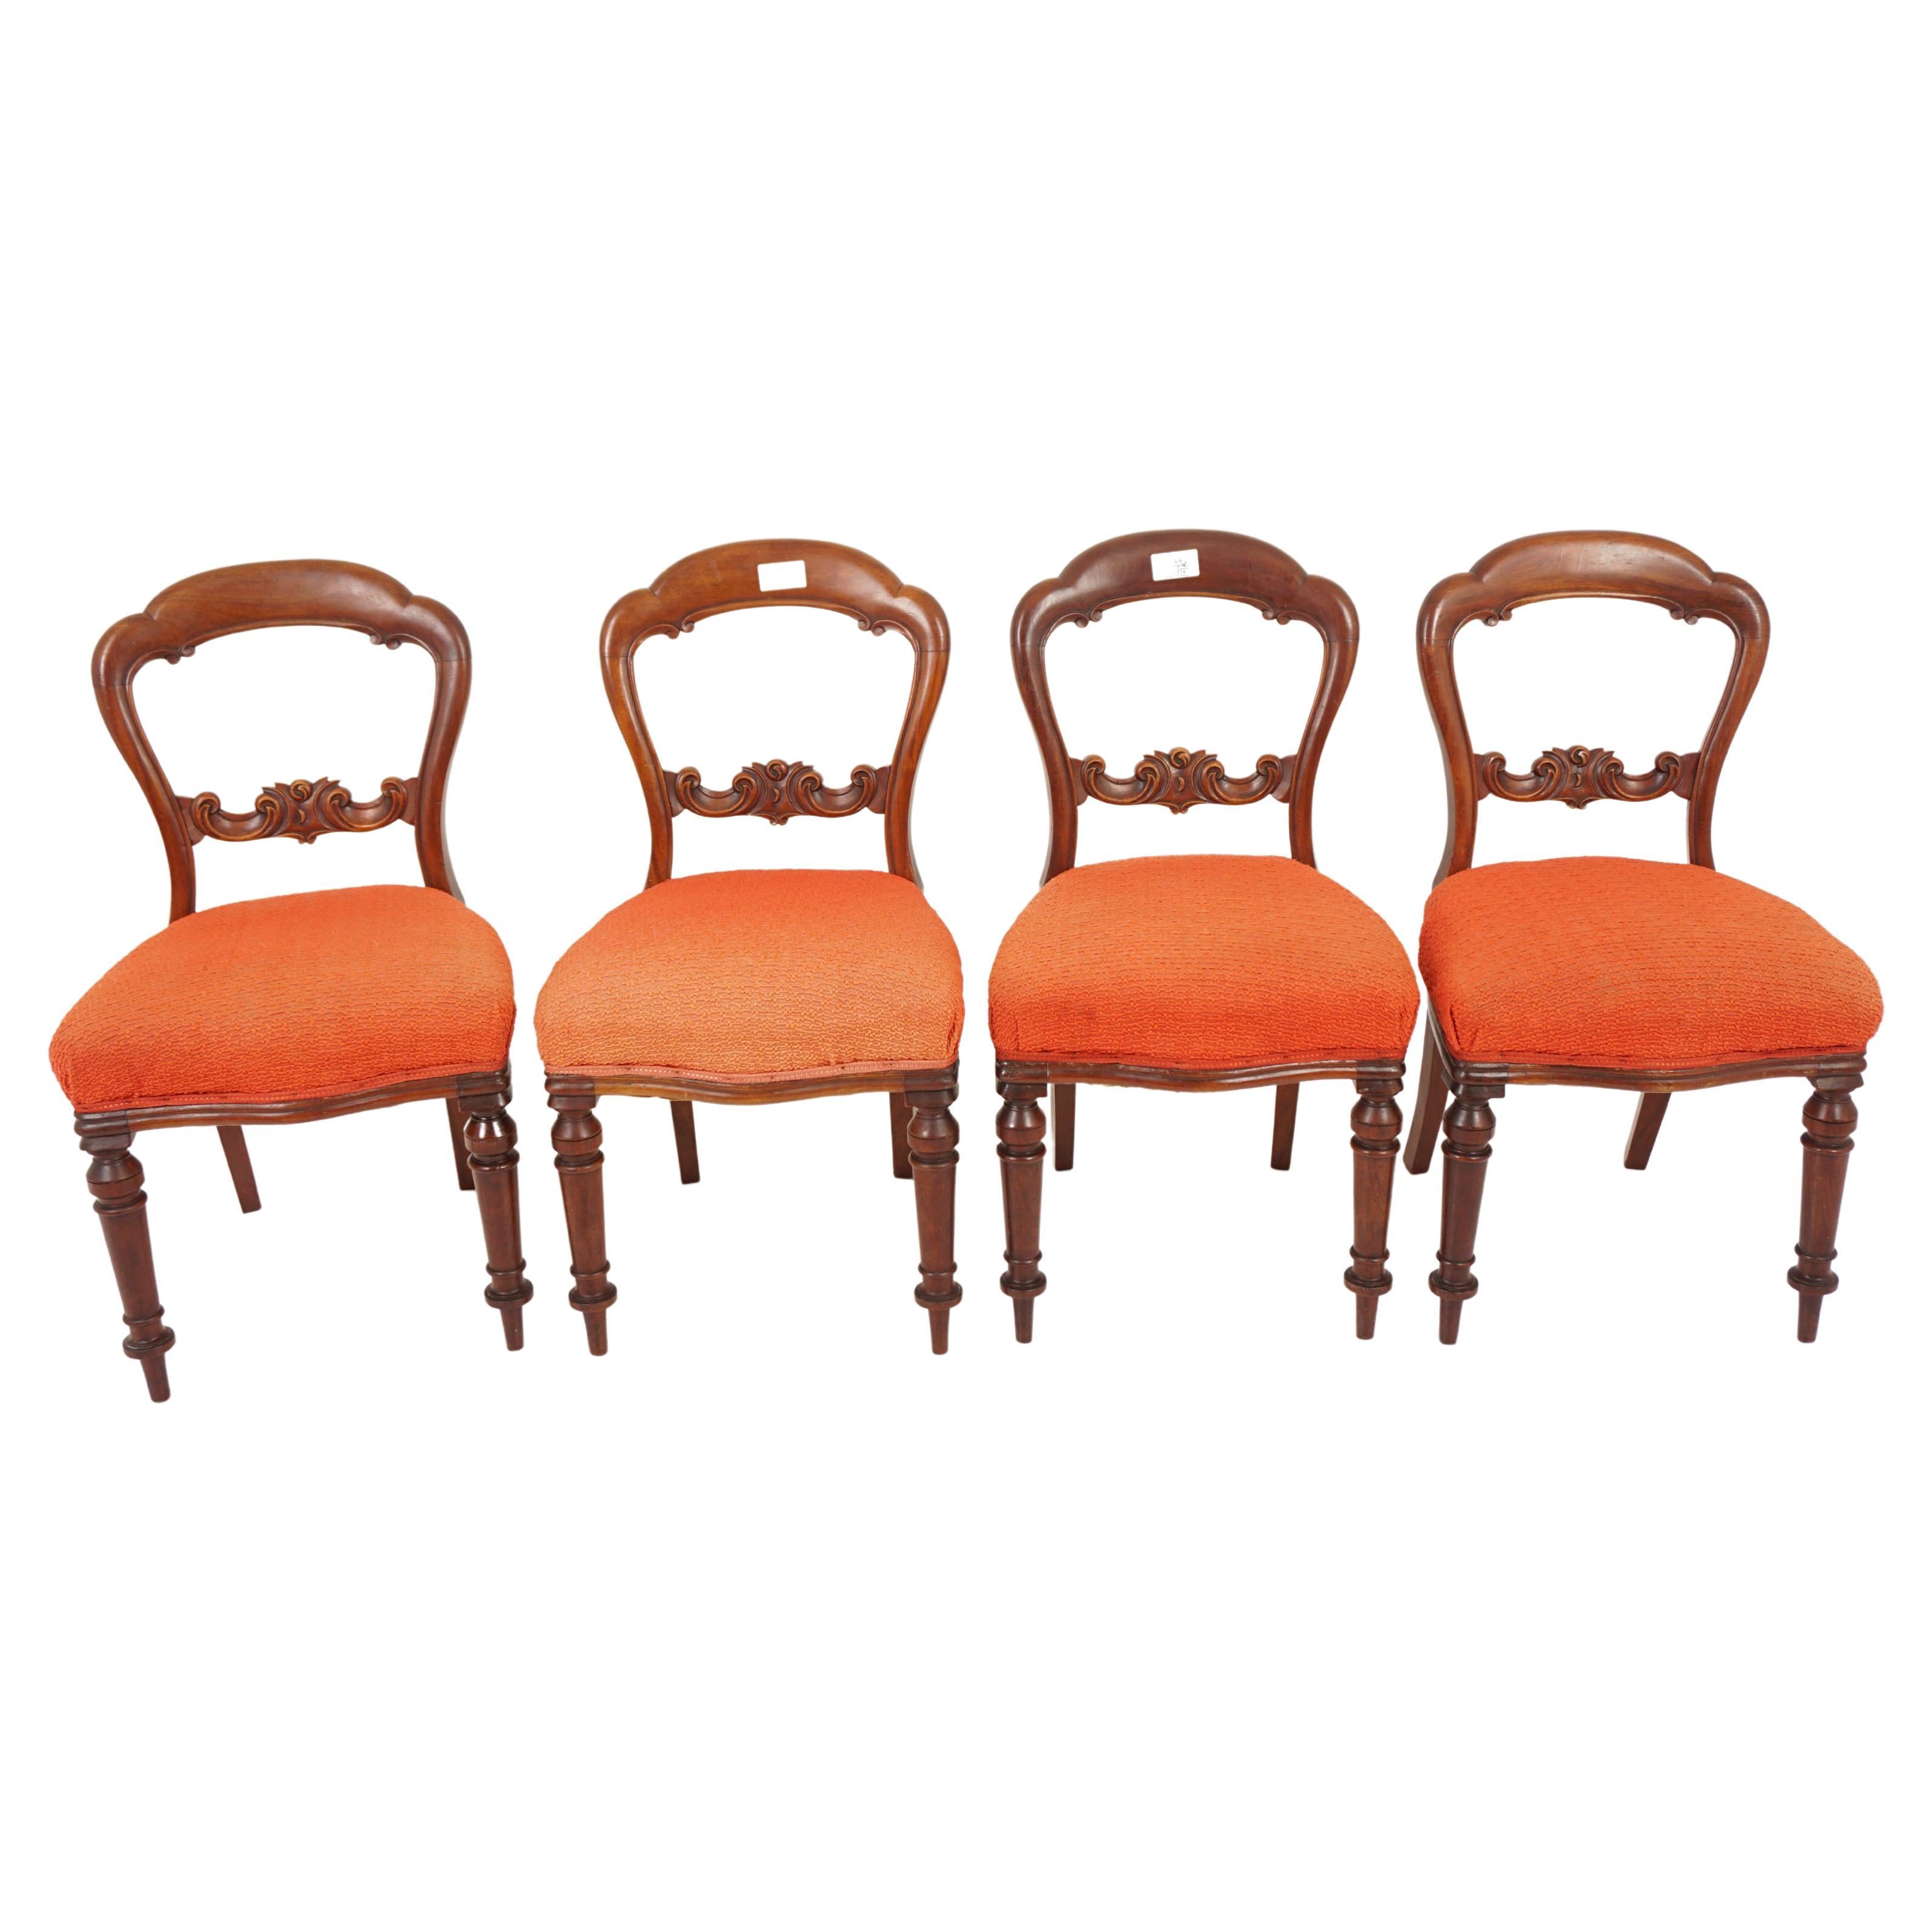 Antique Walnut Chairs, Set of 4 Balloon Back Dining Chairs, Scotland 1880, H952 For Sale